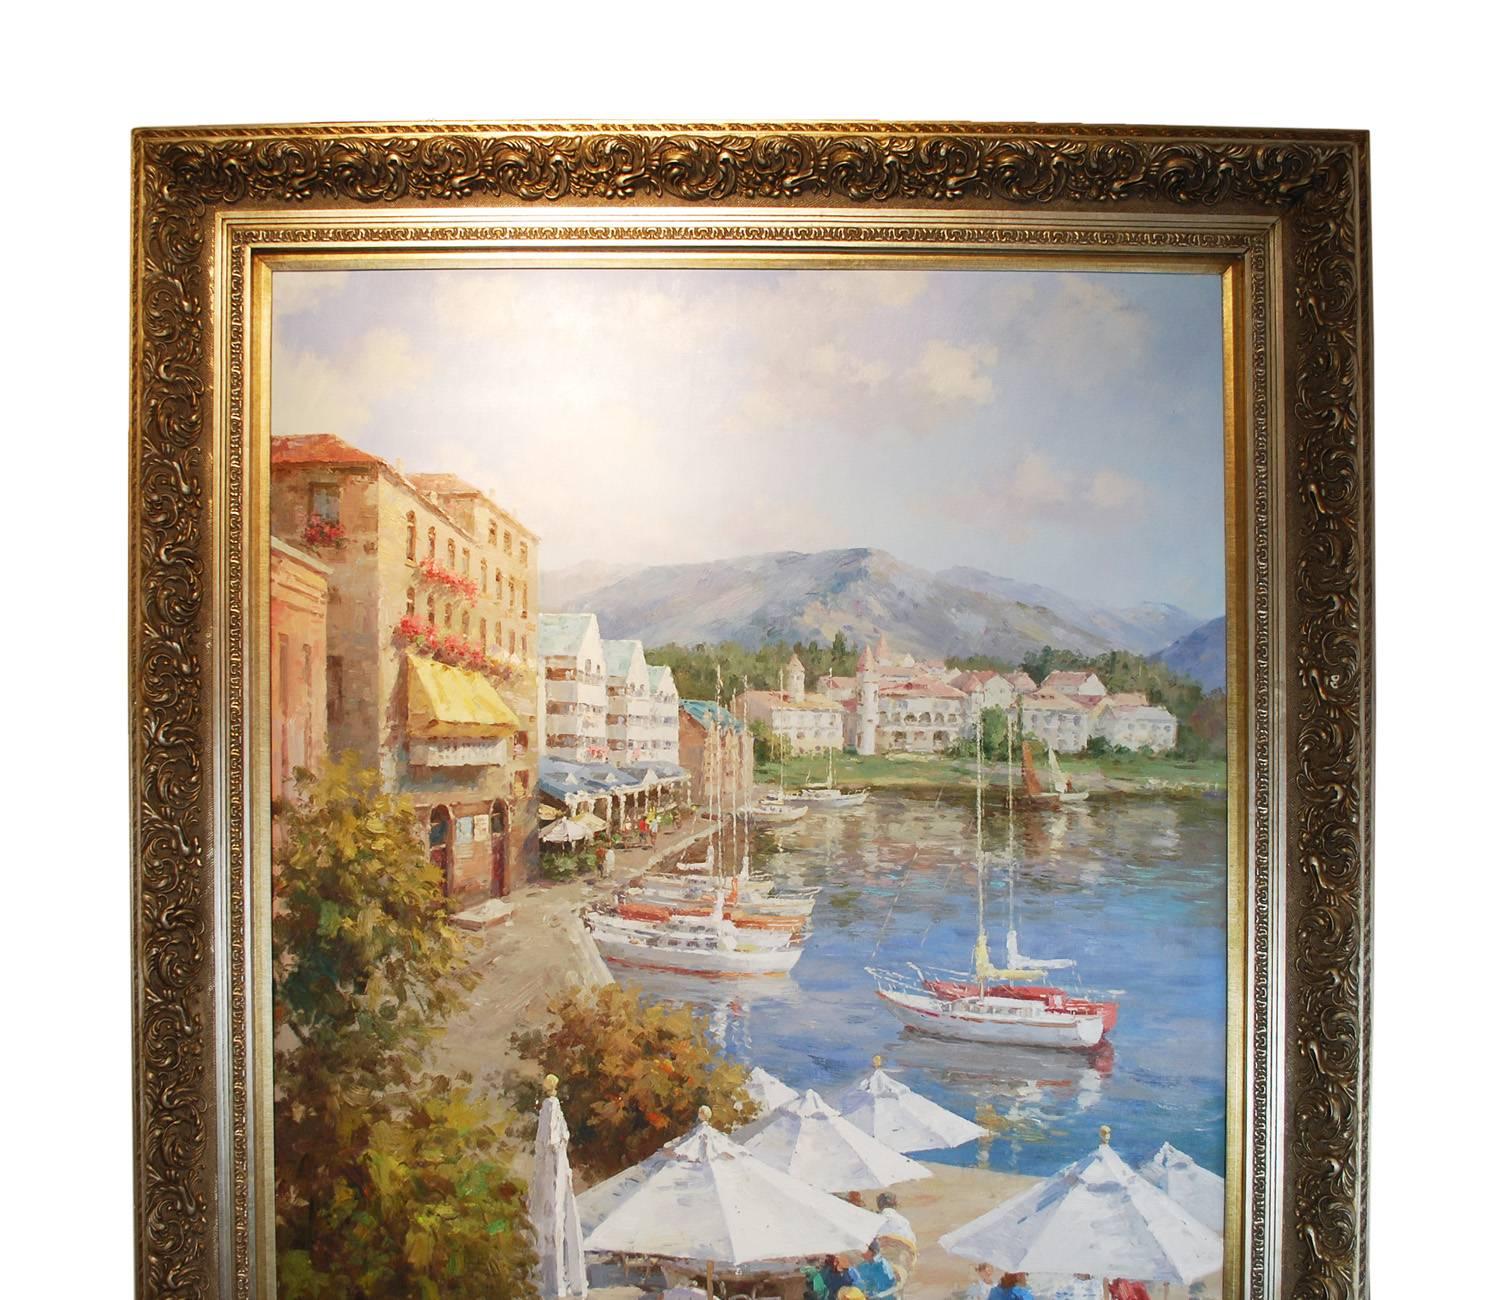 An impressively large size harbor scene in a Mediterranean type setting, framed oil on canvas. Outside cafe with white umbrellas merge water and pleasure yachts pull in to dock in front of old shops and stucco buildings. Mountains loom in the